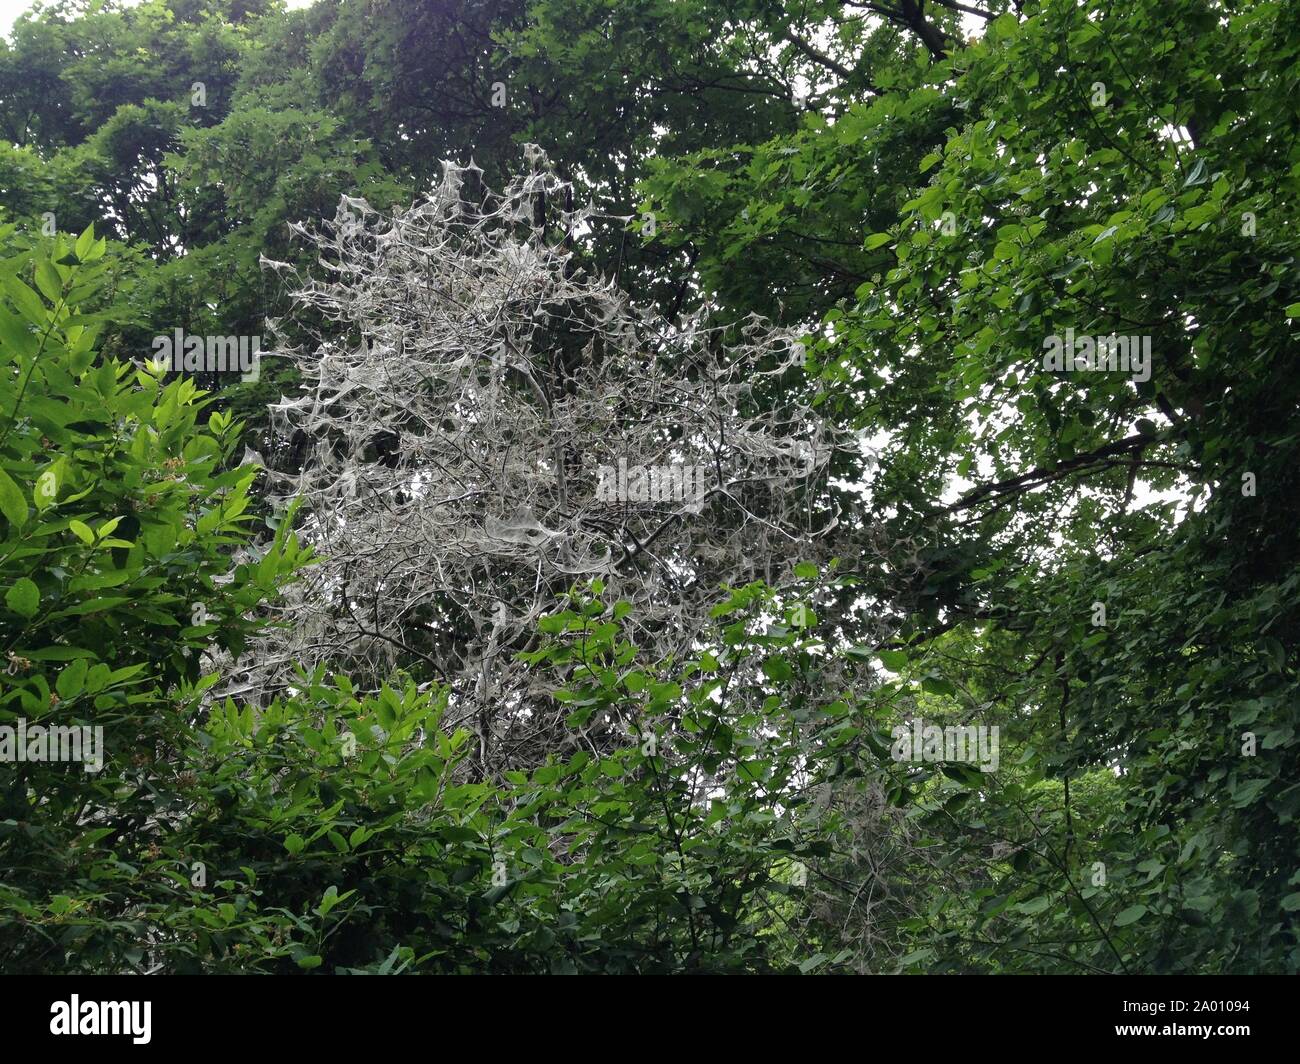 Trees / Bushes covered in Webs by the Ermine Moth (Gespinstmotte) looking spooky/scary in a Berlin Public Park Stock Photo